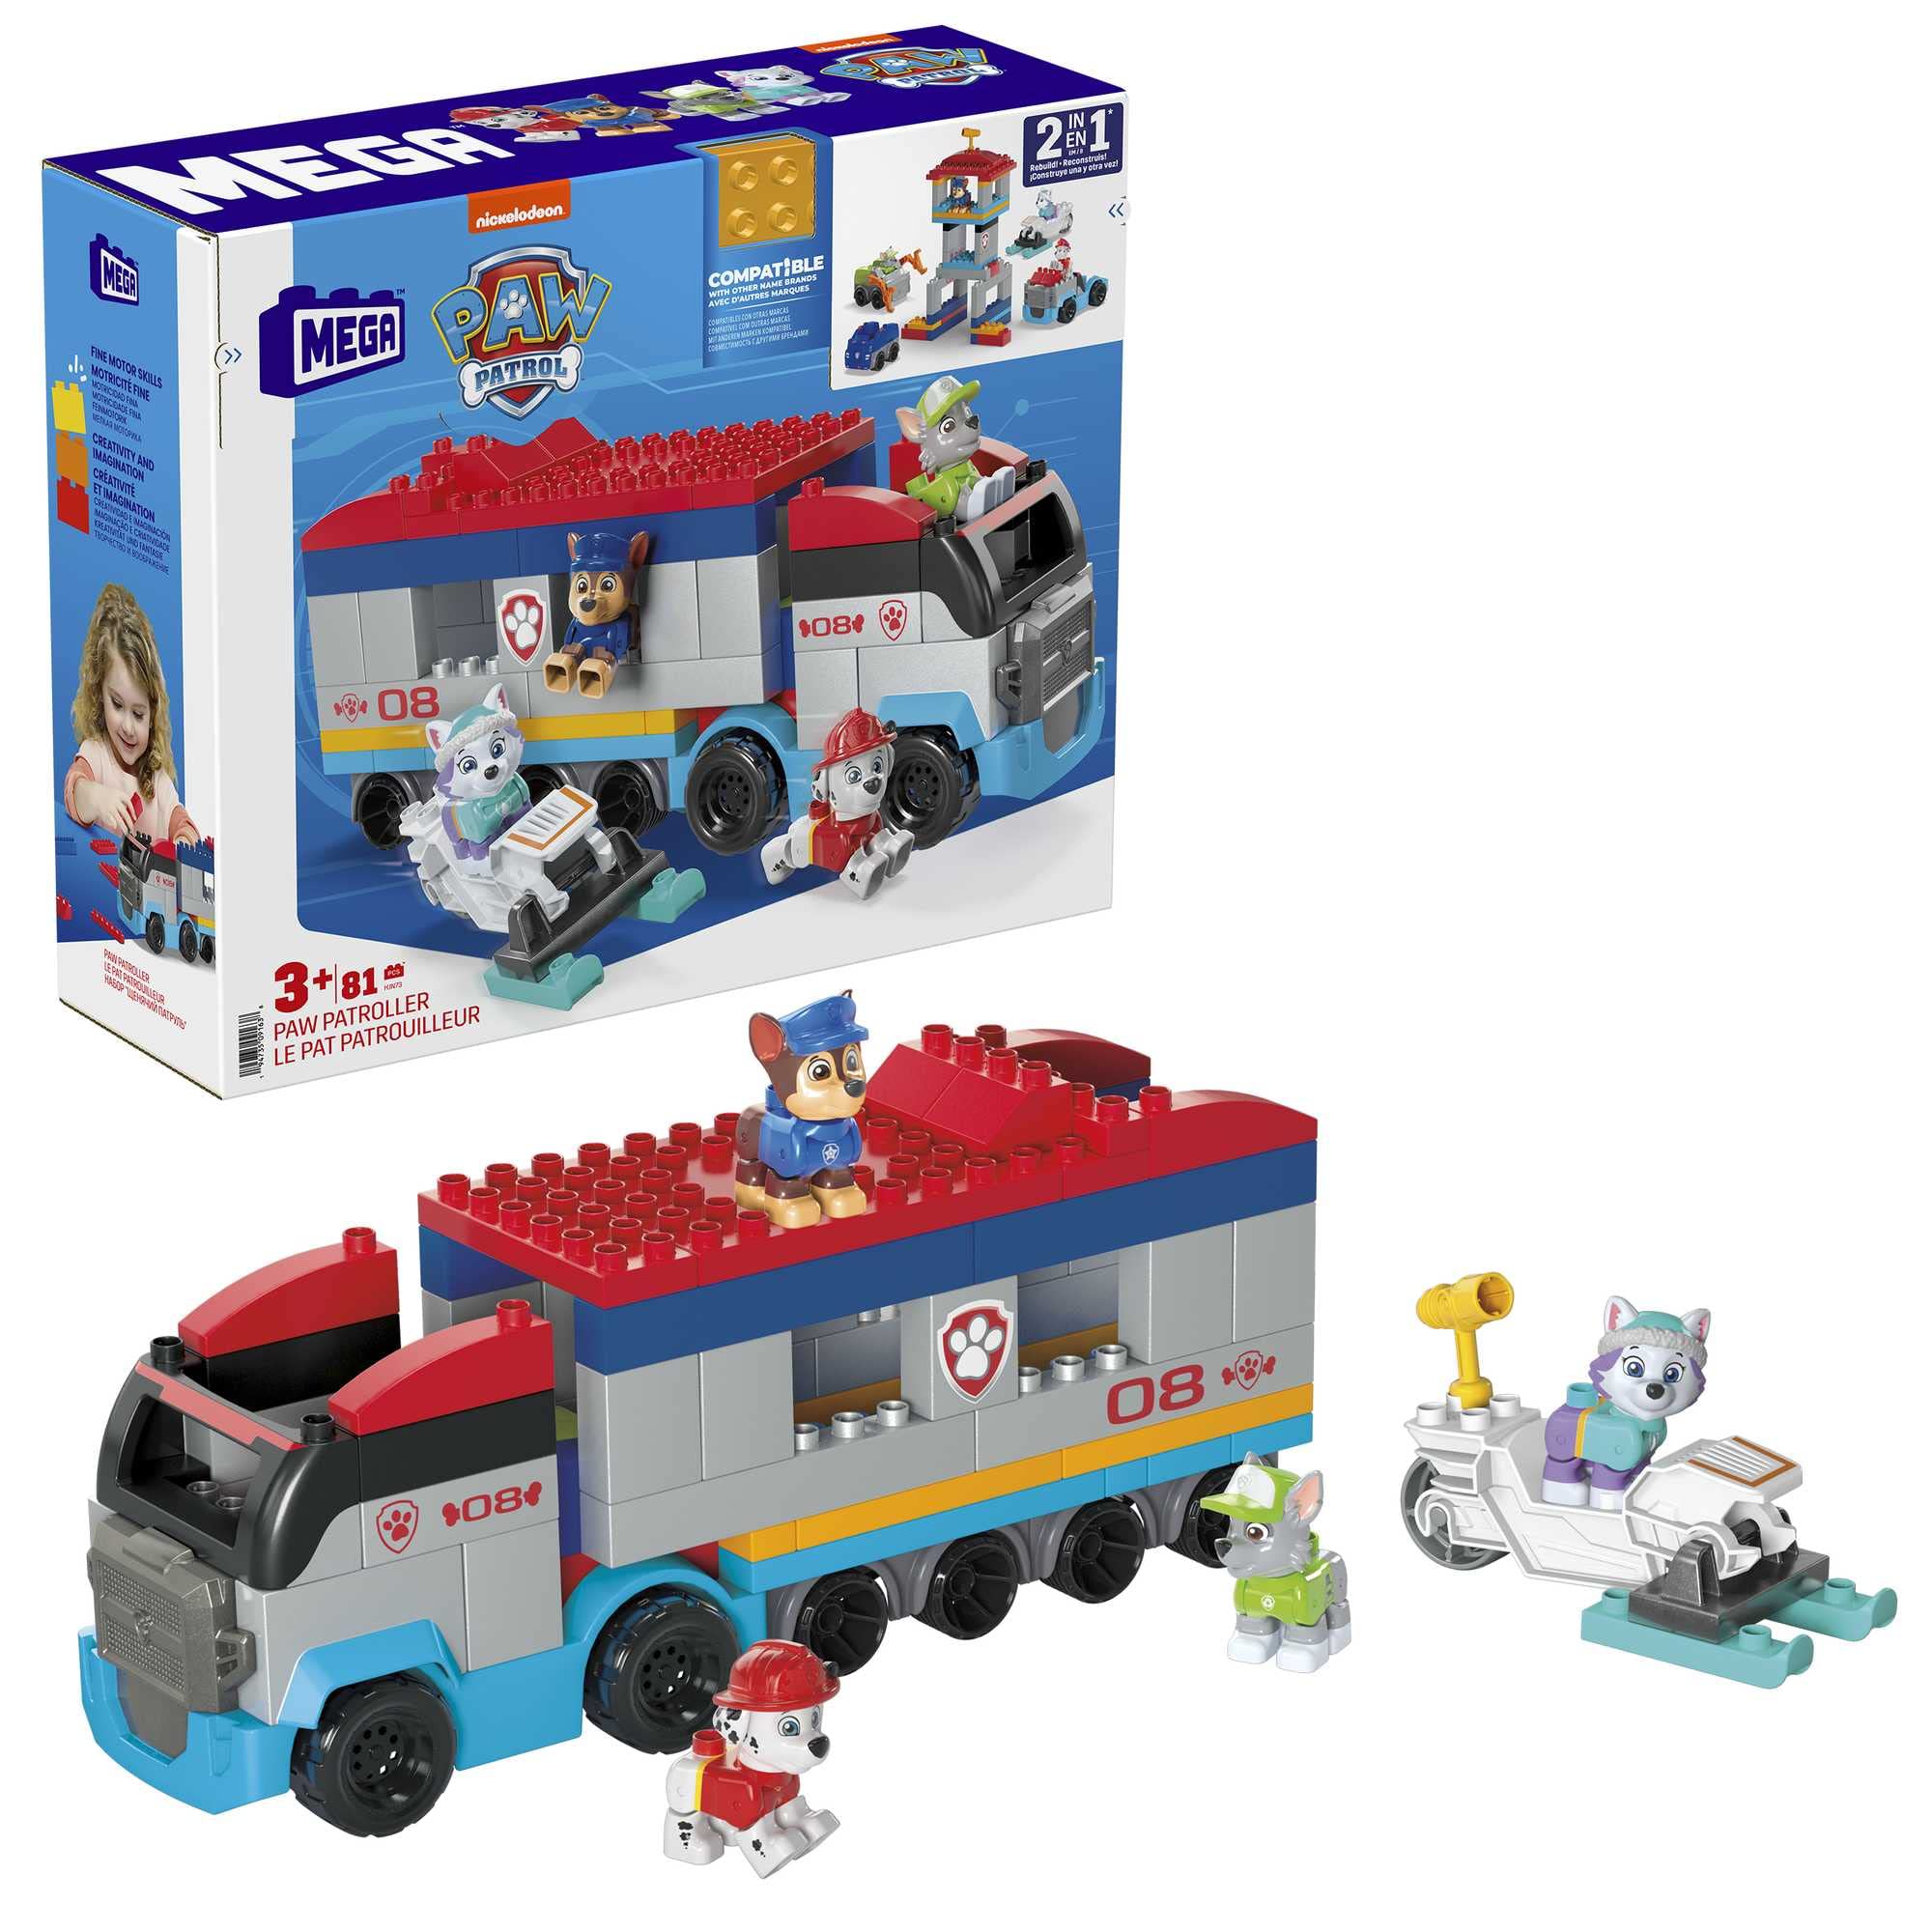 Mega Nickelodeon Paw Patrol Nickelodeon Paw Patroller Building Set With Chase, Marshall, Rocky And Everest Figures, And 